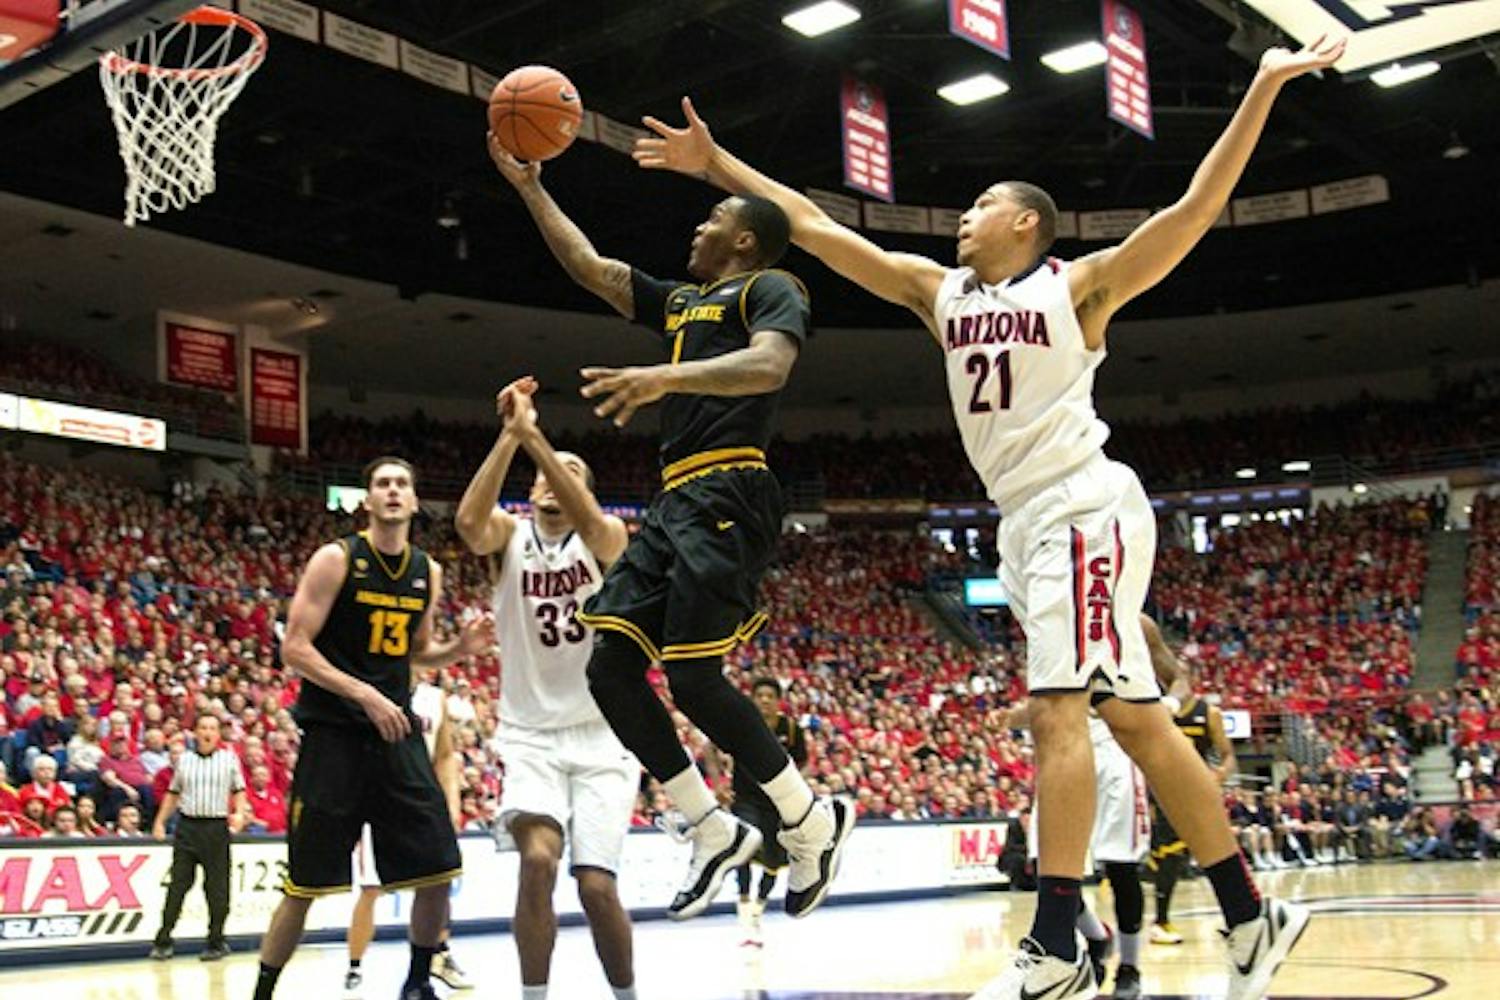 Redshirt freshman Jahii Carson glides through the air on a layup against UA on March 9. Carson has lived up to the hype this season and the Sun Devils success next year greatly depends on whether he returns. (Photo by Dominic Valente)